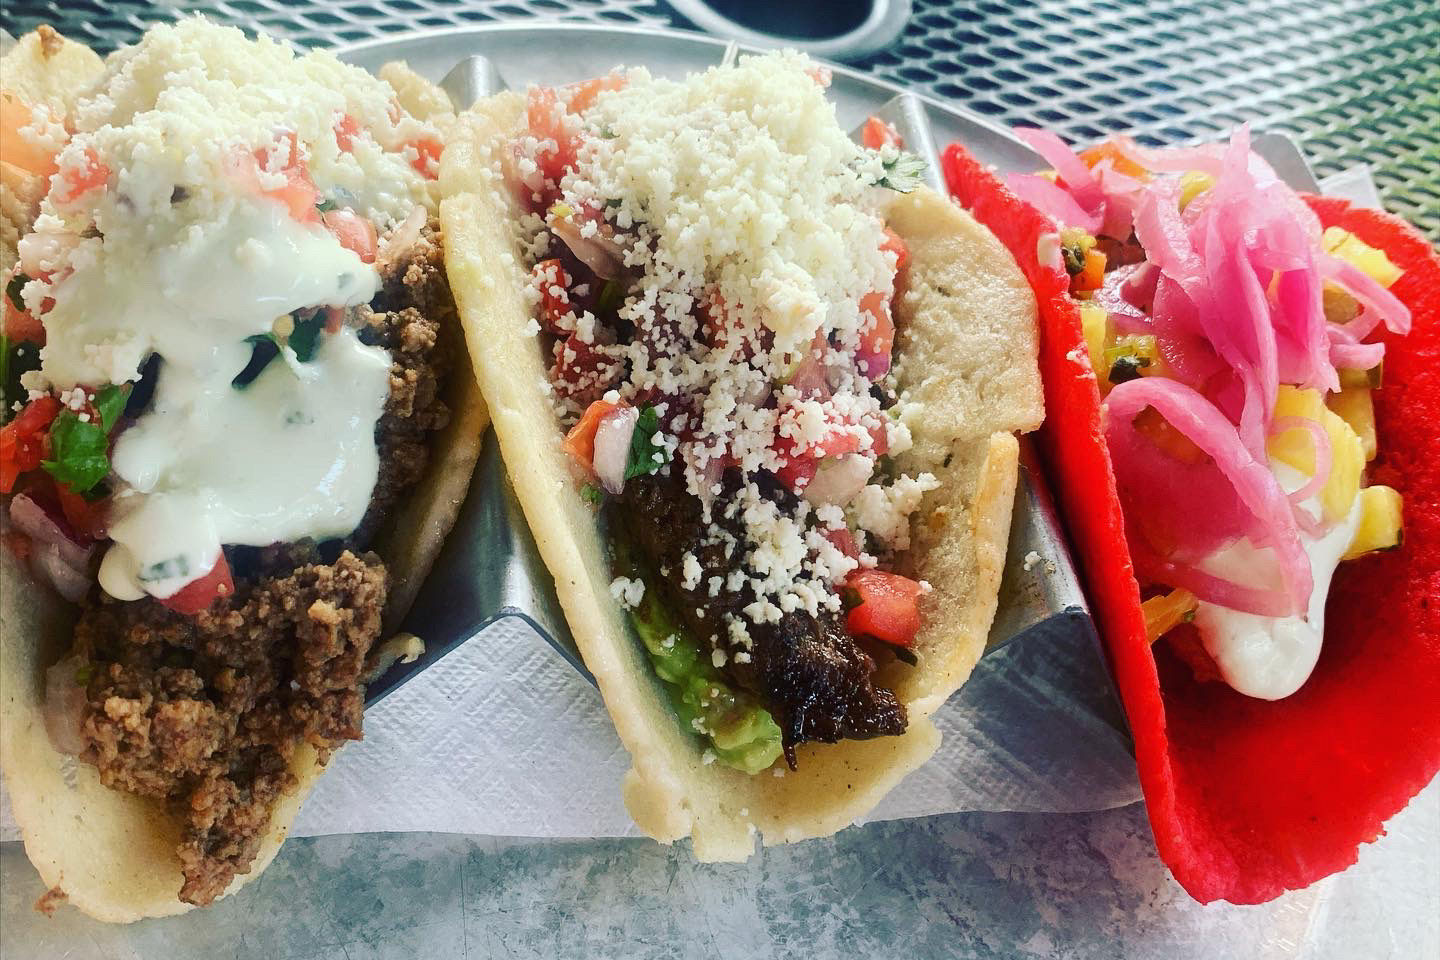 Pair Your Tacos with…. Wine?